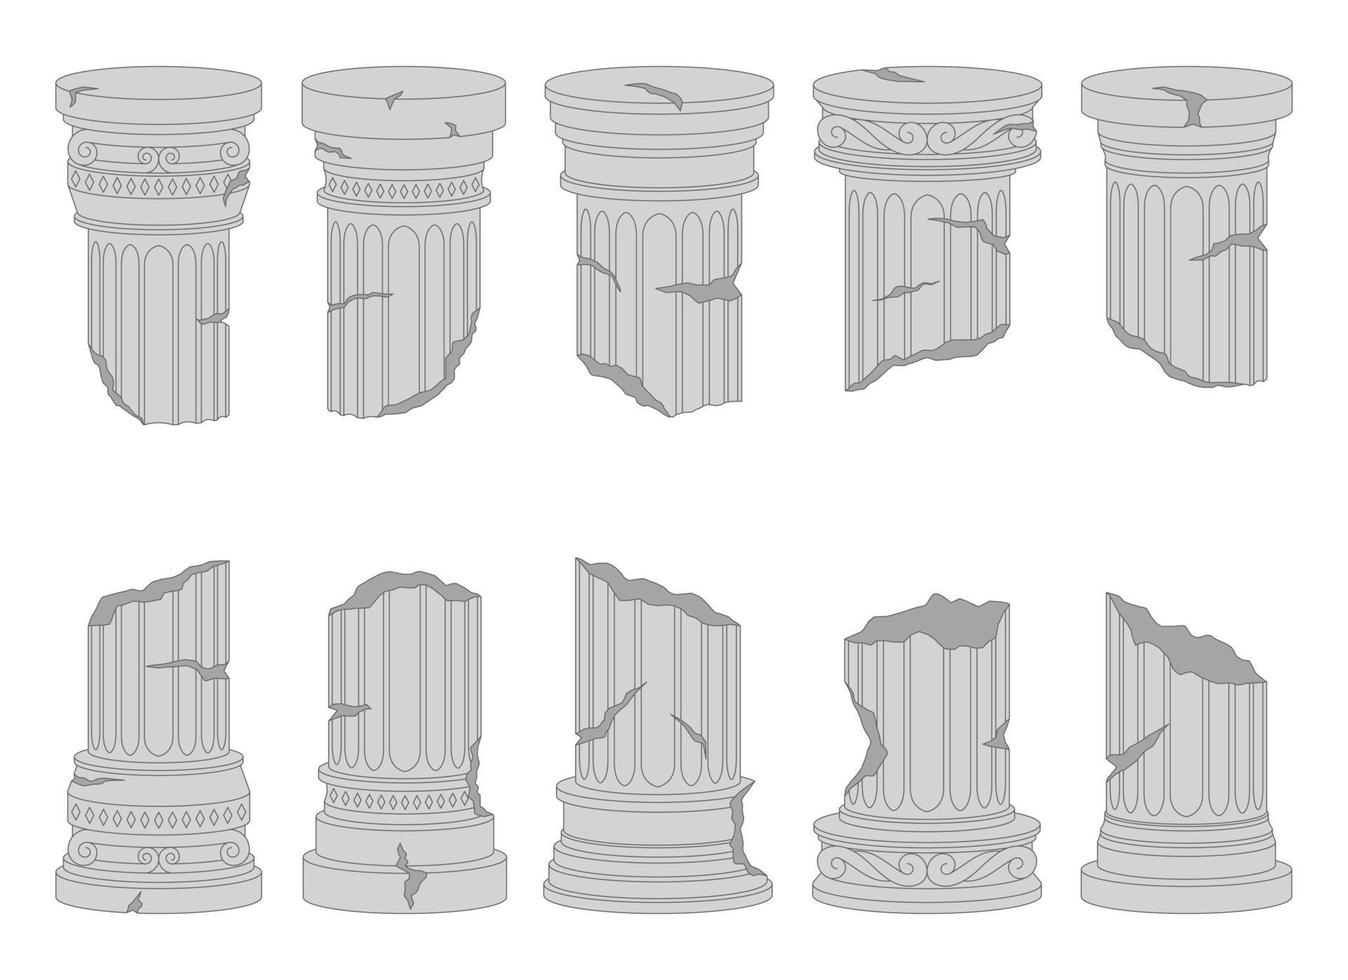 Ancient columns vector design illustration isolated on background